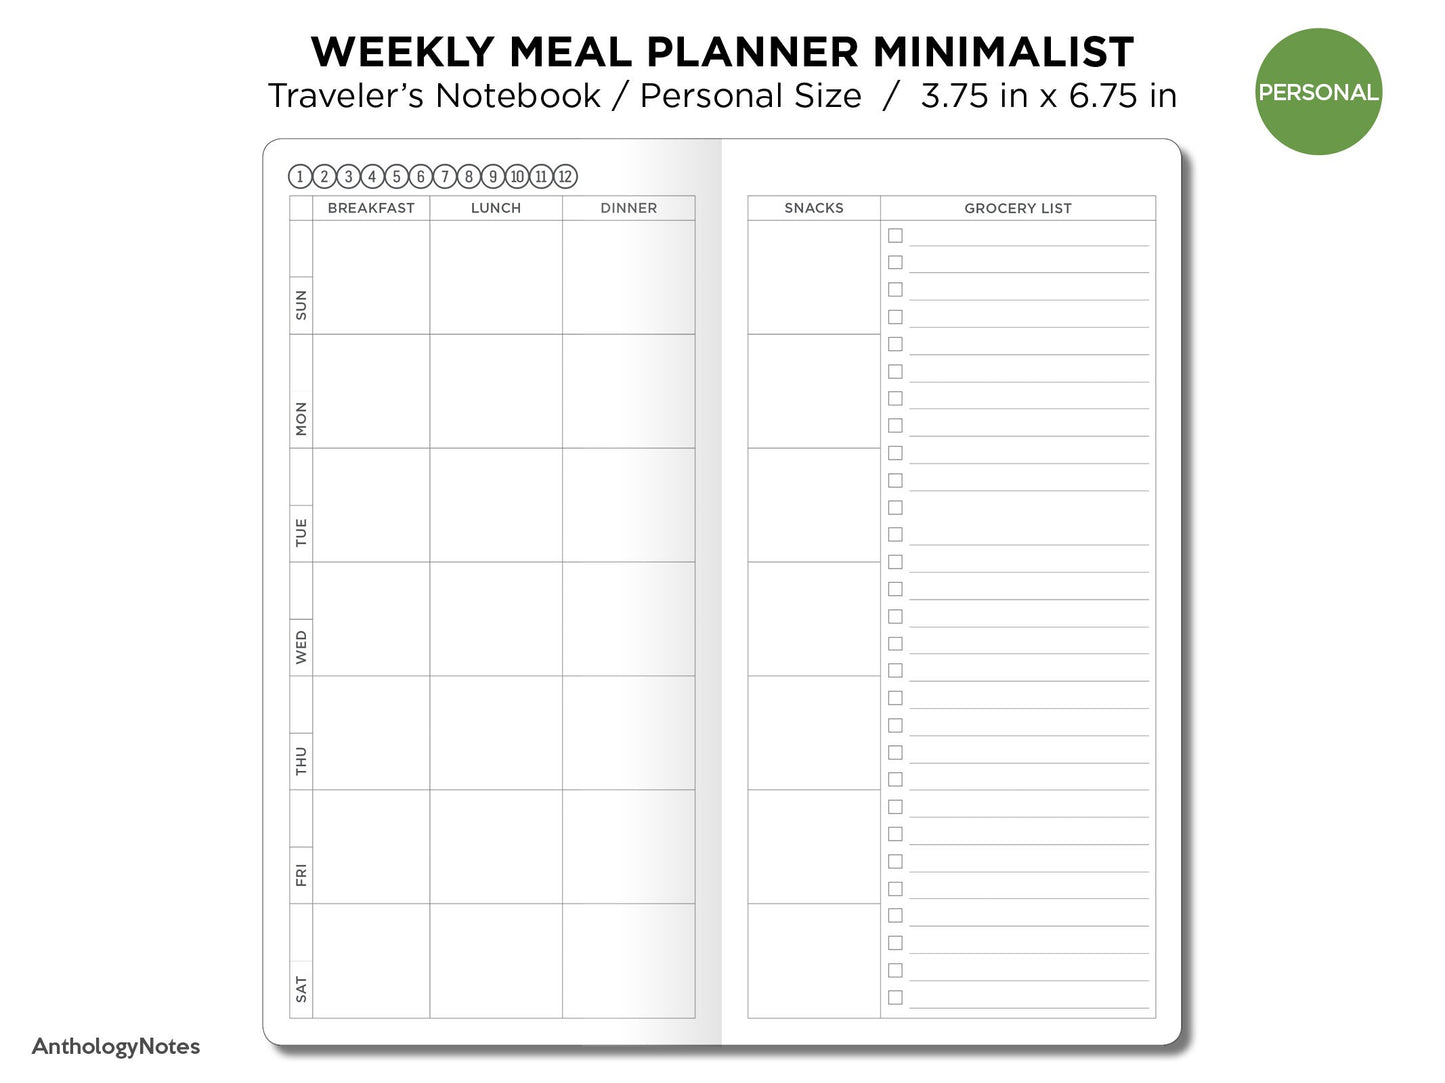 TN PERSONAL WEEKLY Meal Planner Traveler's Notebook - Printable Refill Insert